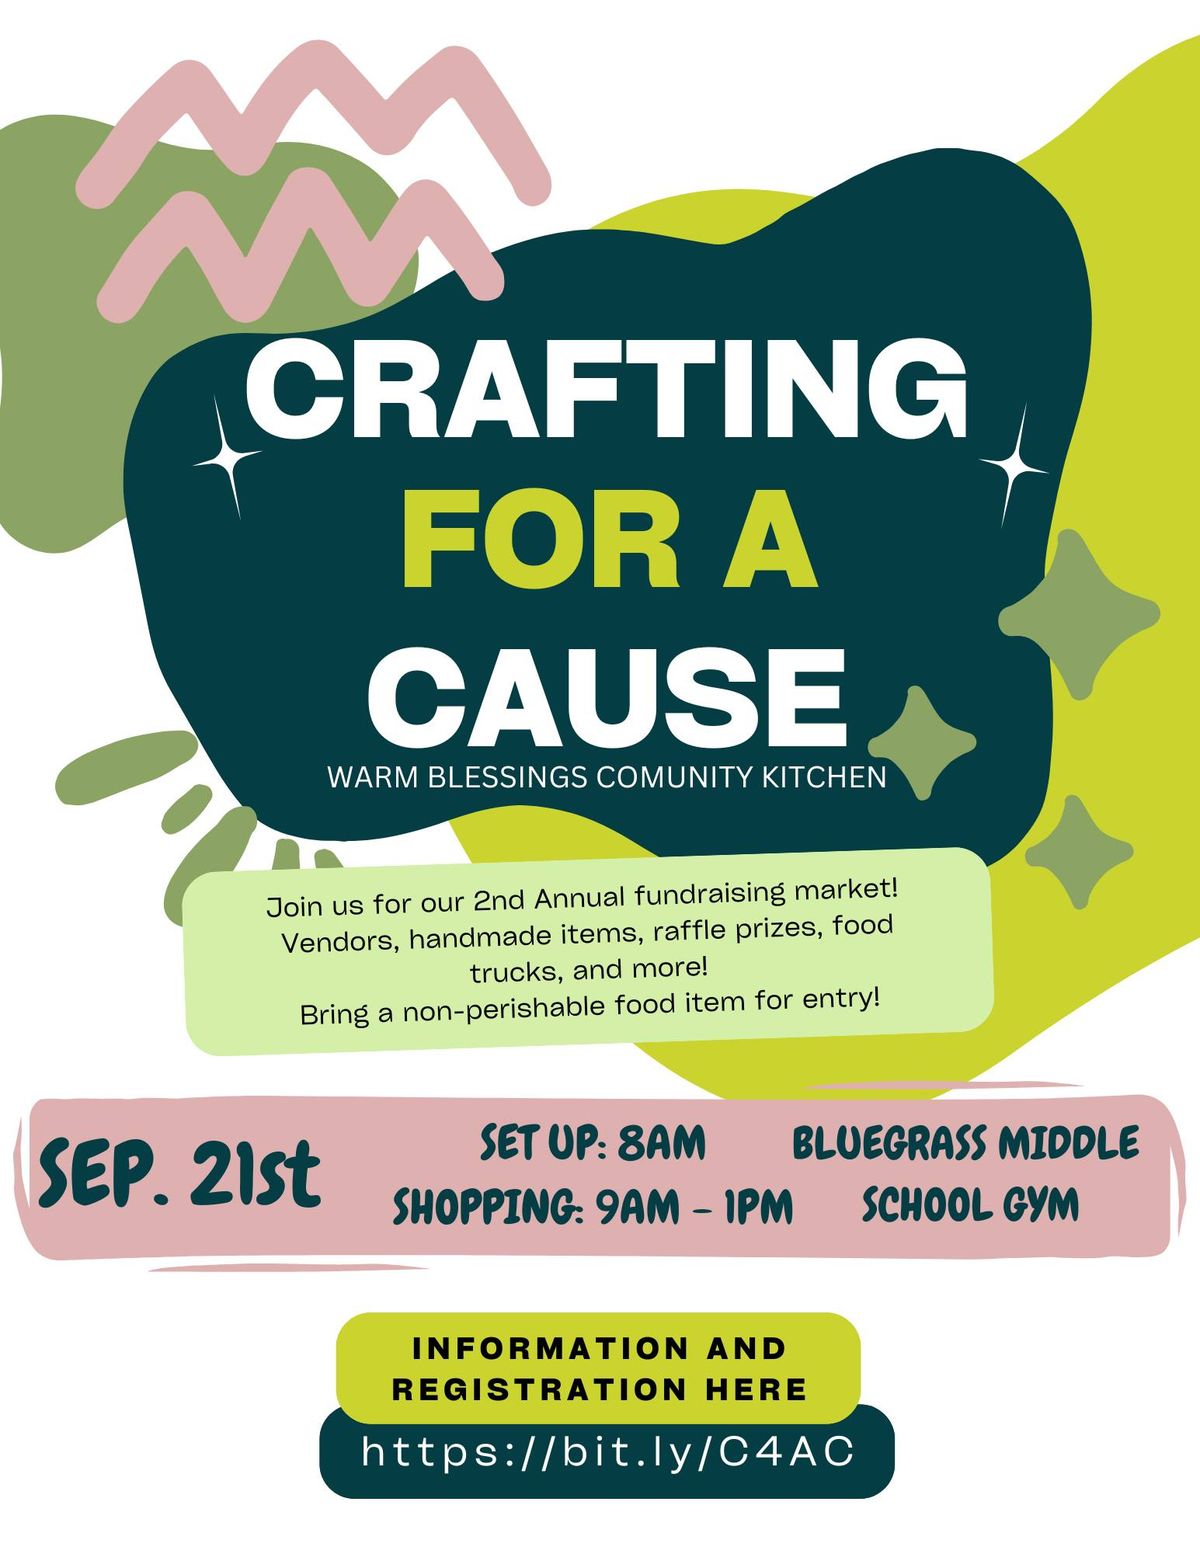 CRAFTING FOR A CAUSE